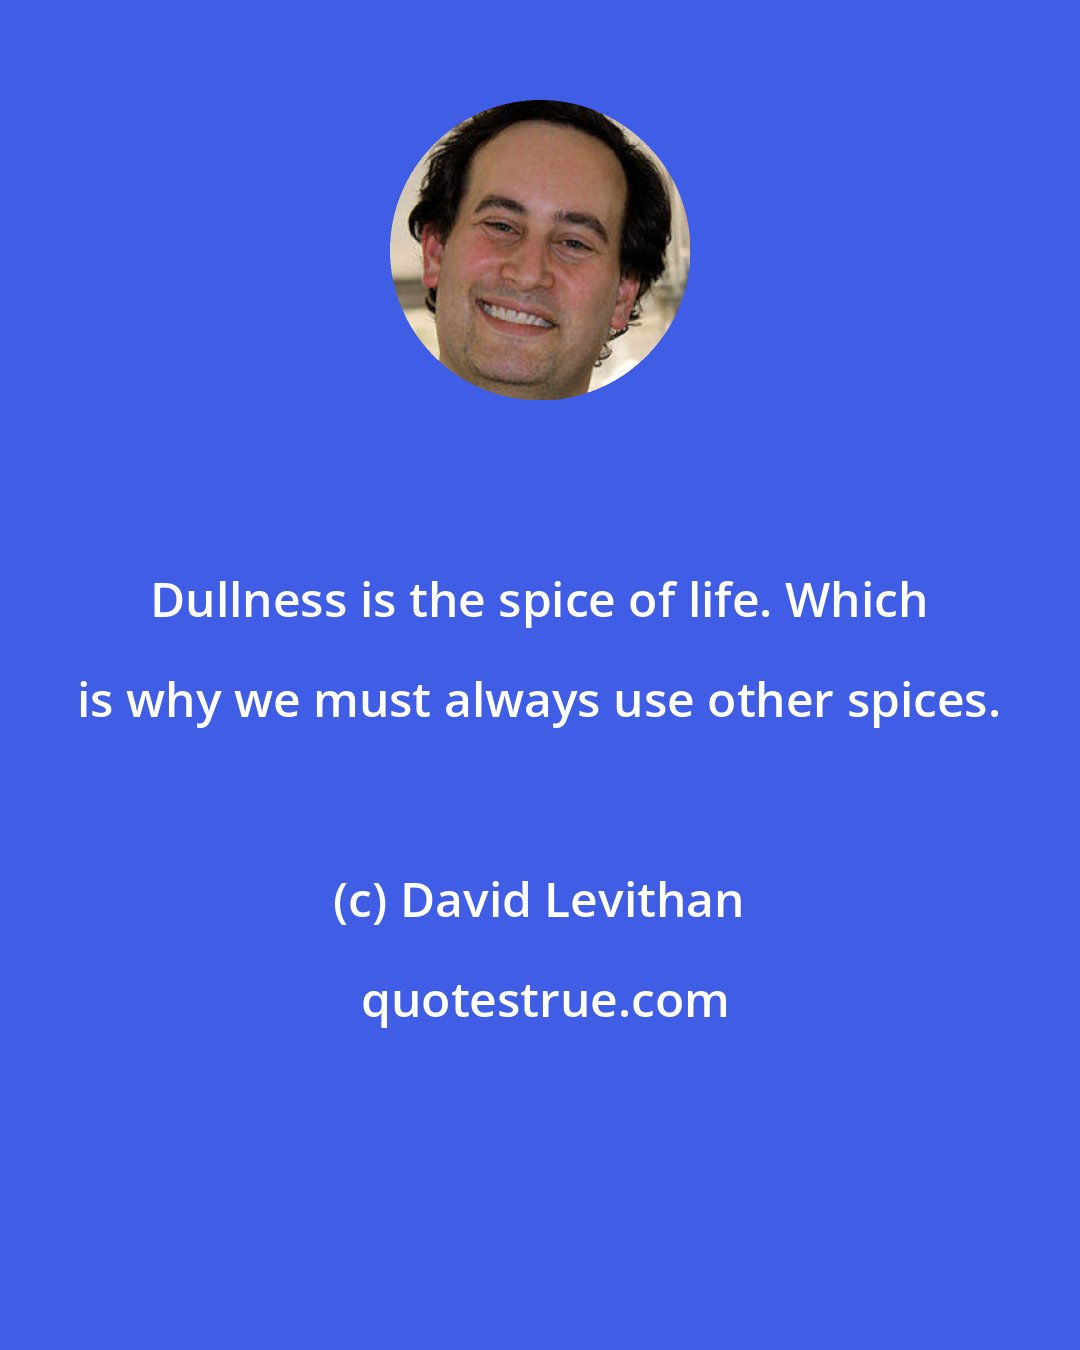 David Levithan: Dullness is the spice of life. Which is why we must always use other spices.